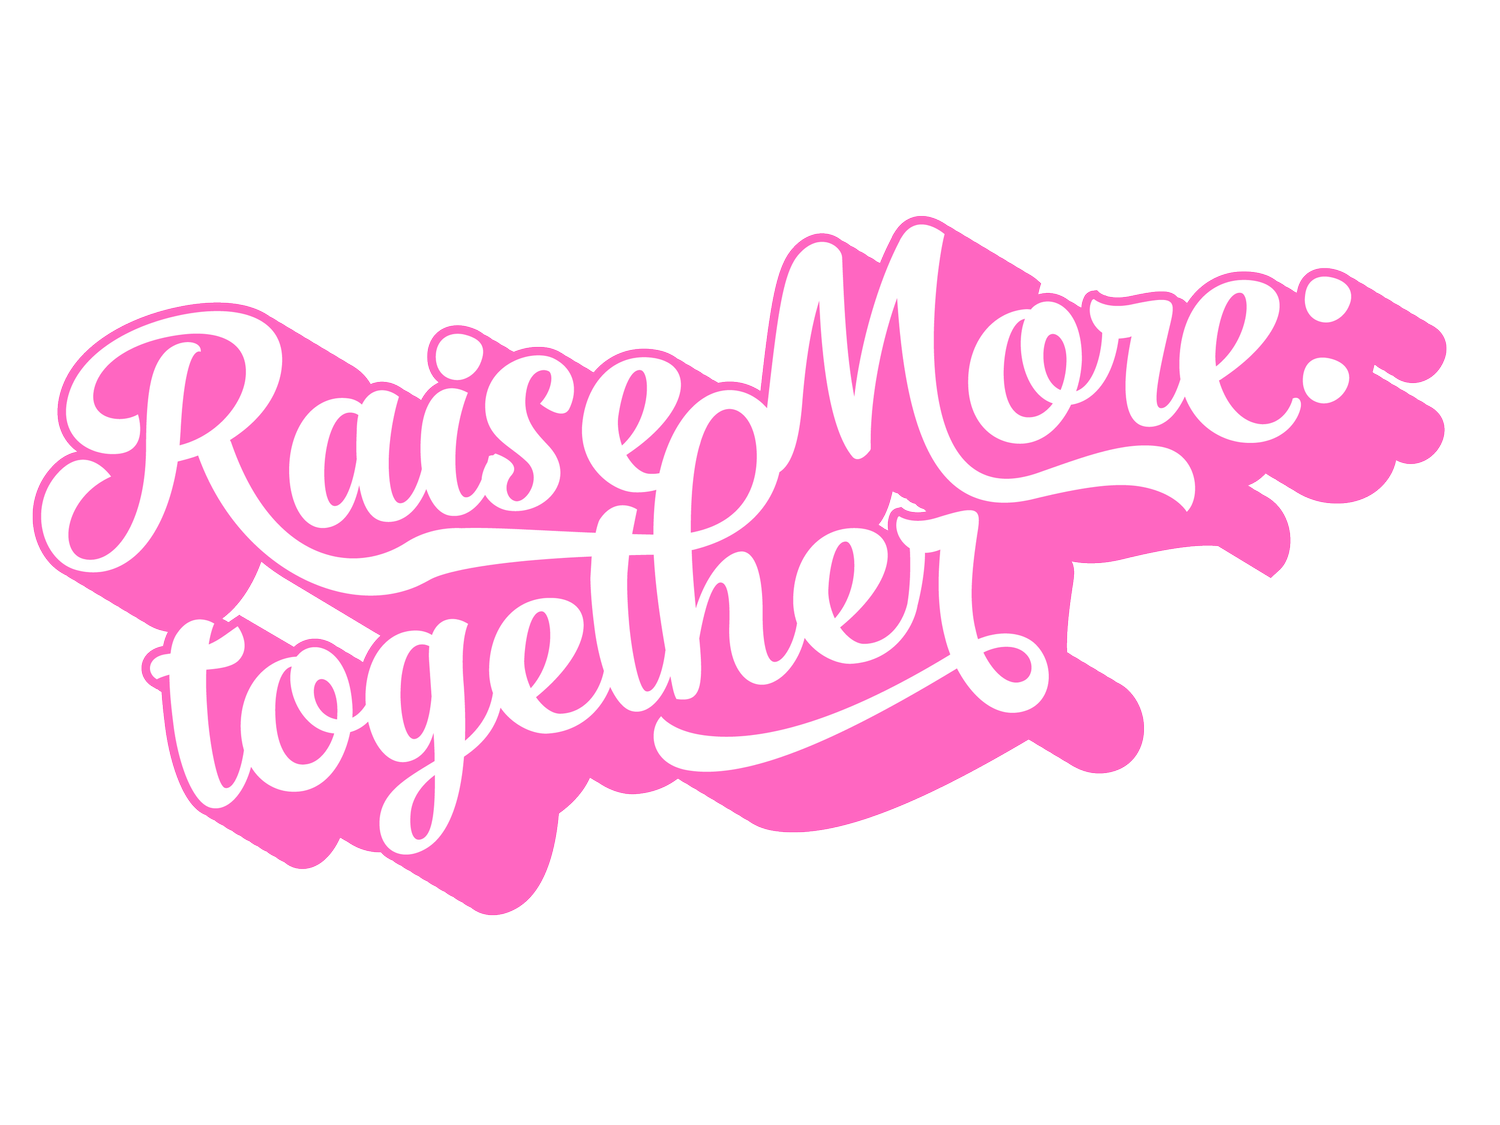 Raise More Together